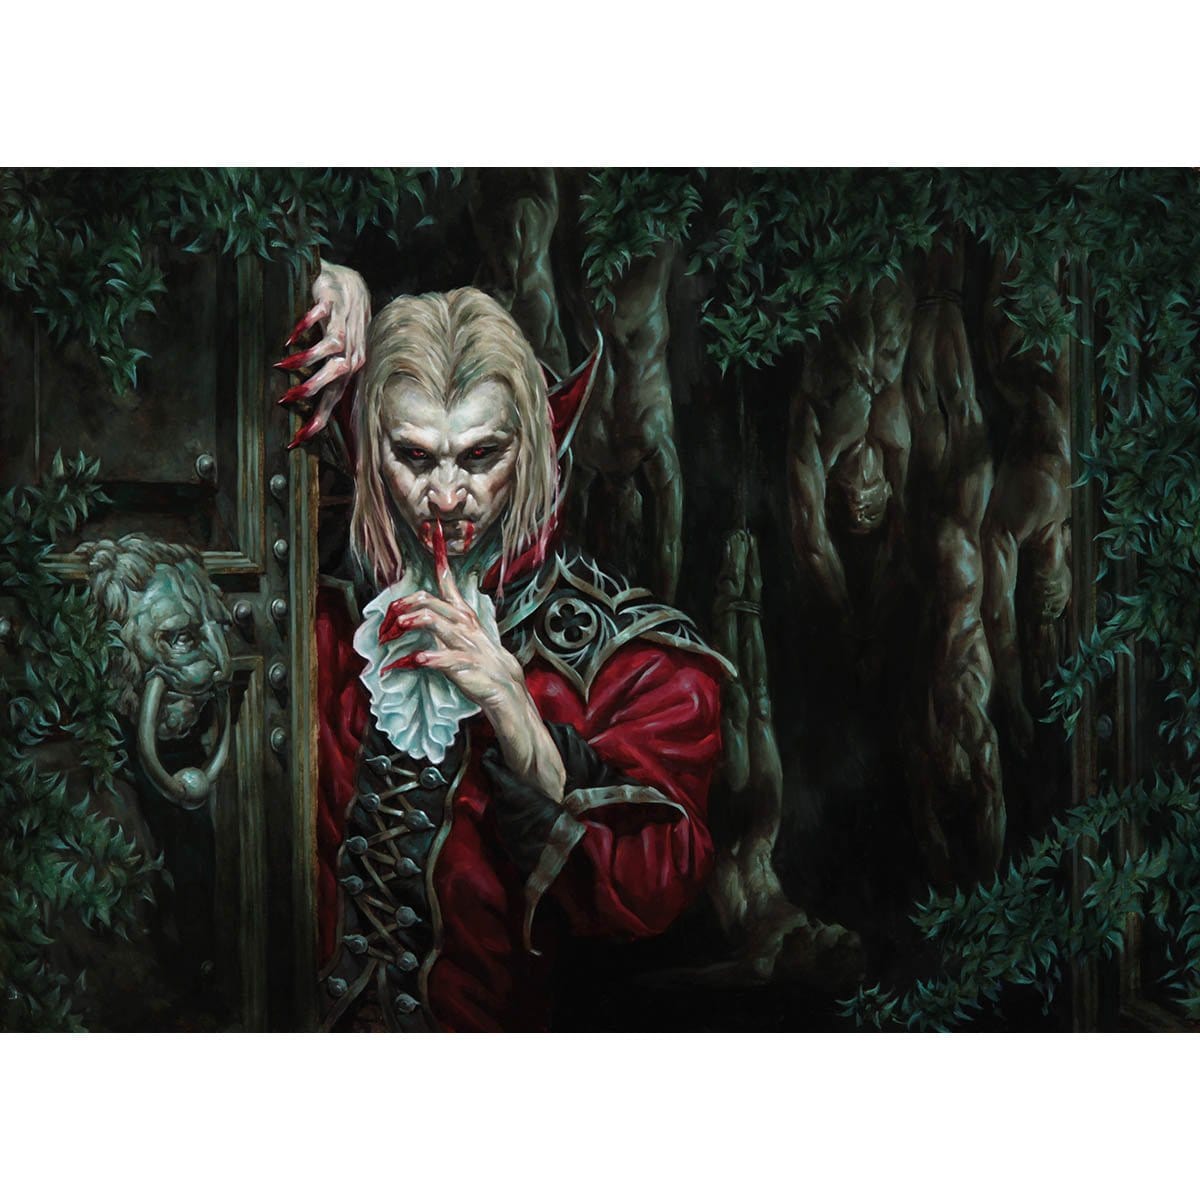 Nearheath Stalker Print - Print - Original Magic Art - Accessories for Magic the Gathering and other card games